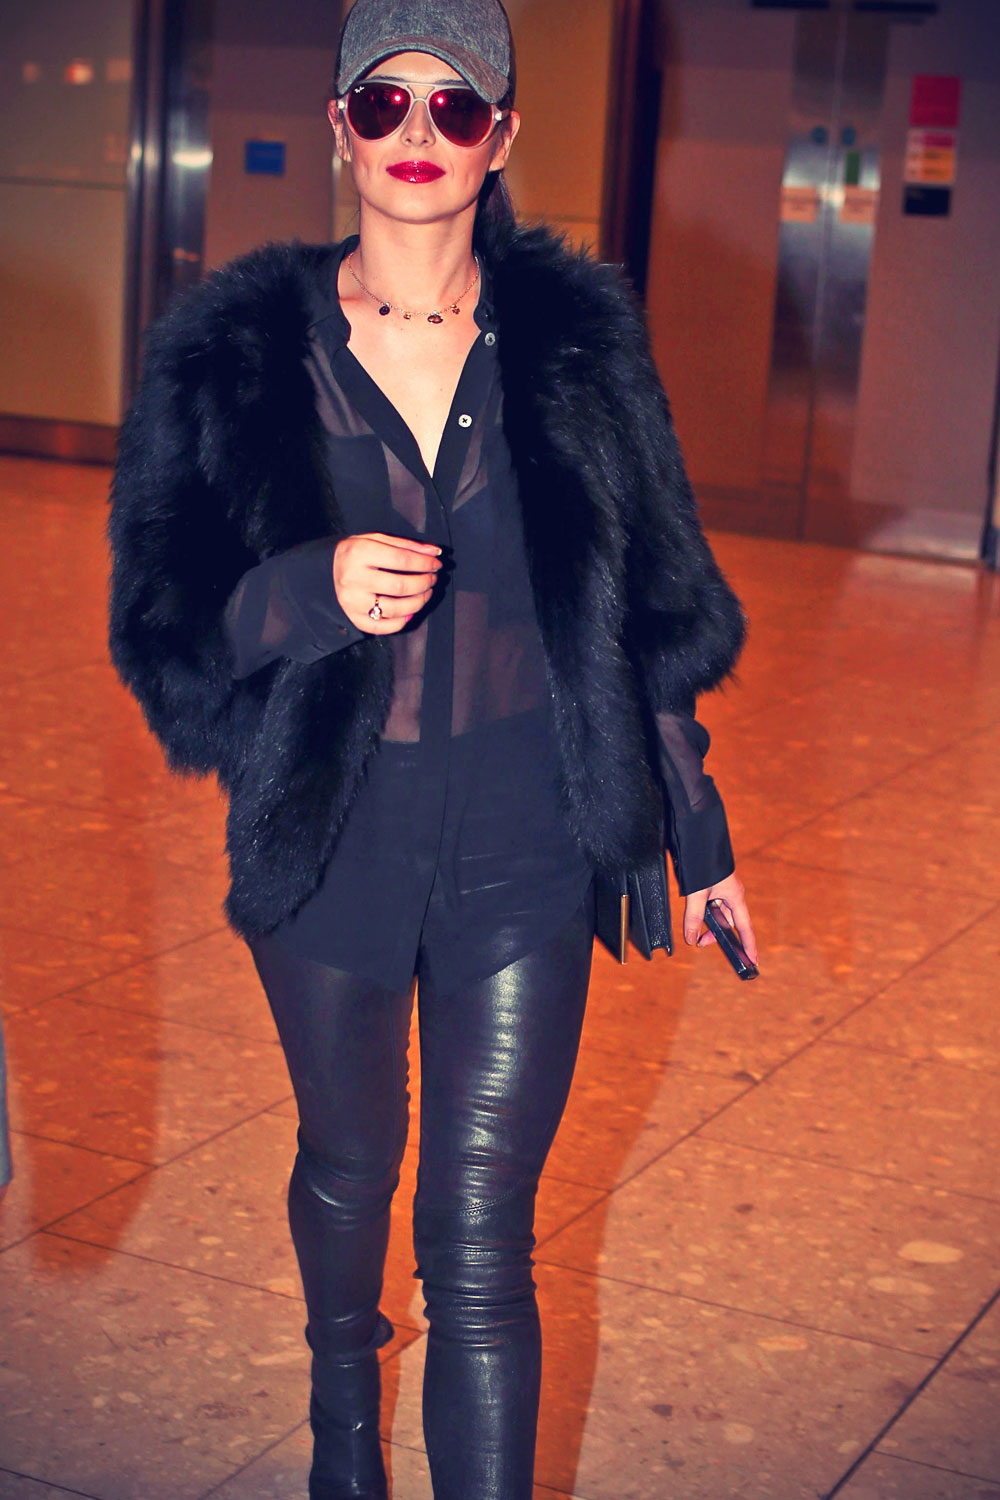 Cheryl Cole at Heathrow Airport in London